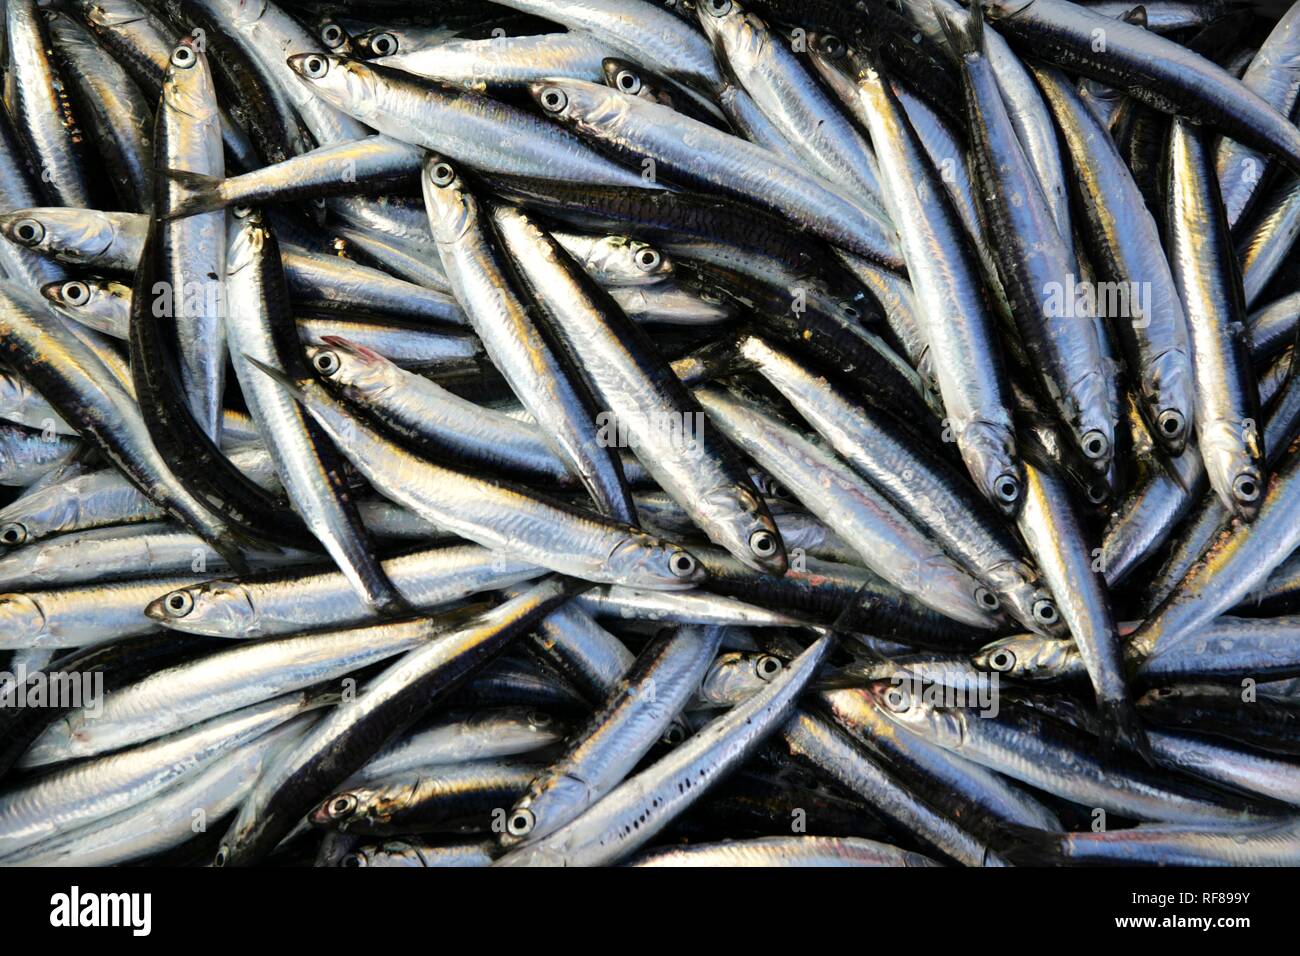 The day's haul on sardine fishing boat 'Jastreb, ' based in Kali on Ugljan Island, at a fishing site off of Pag Island in the Stock Photo